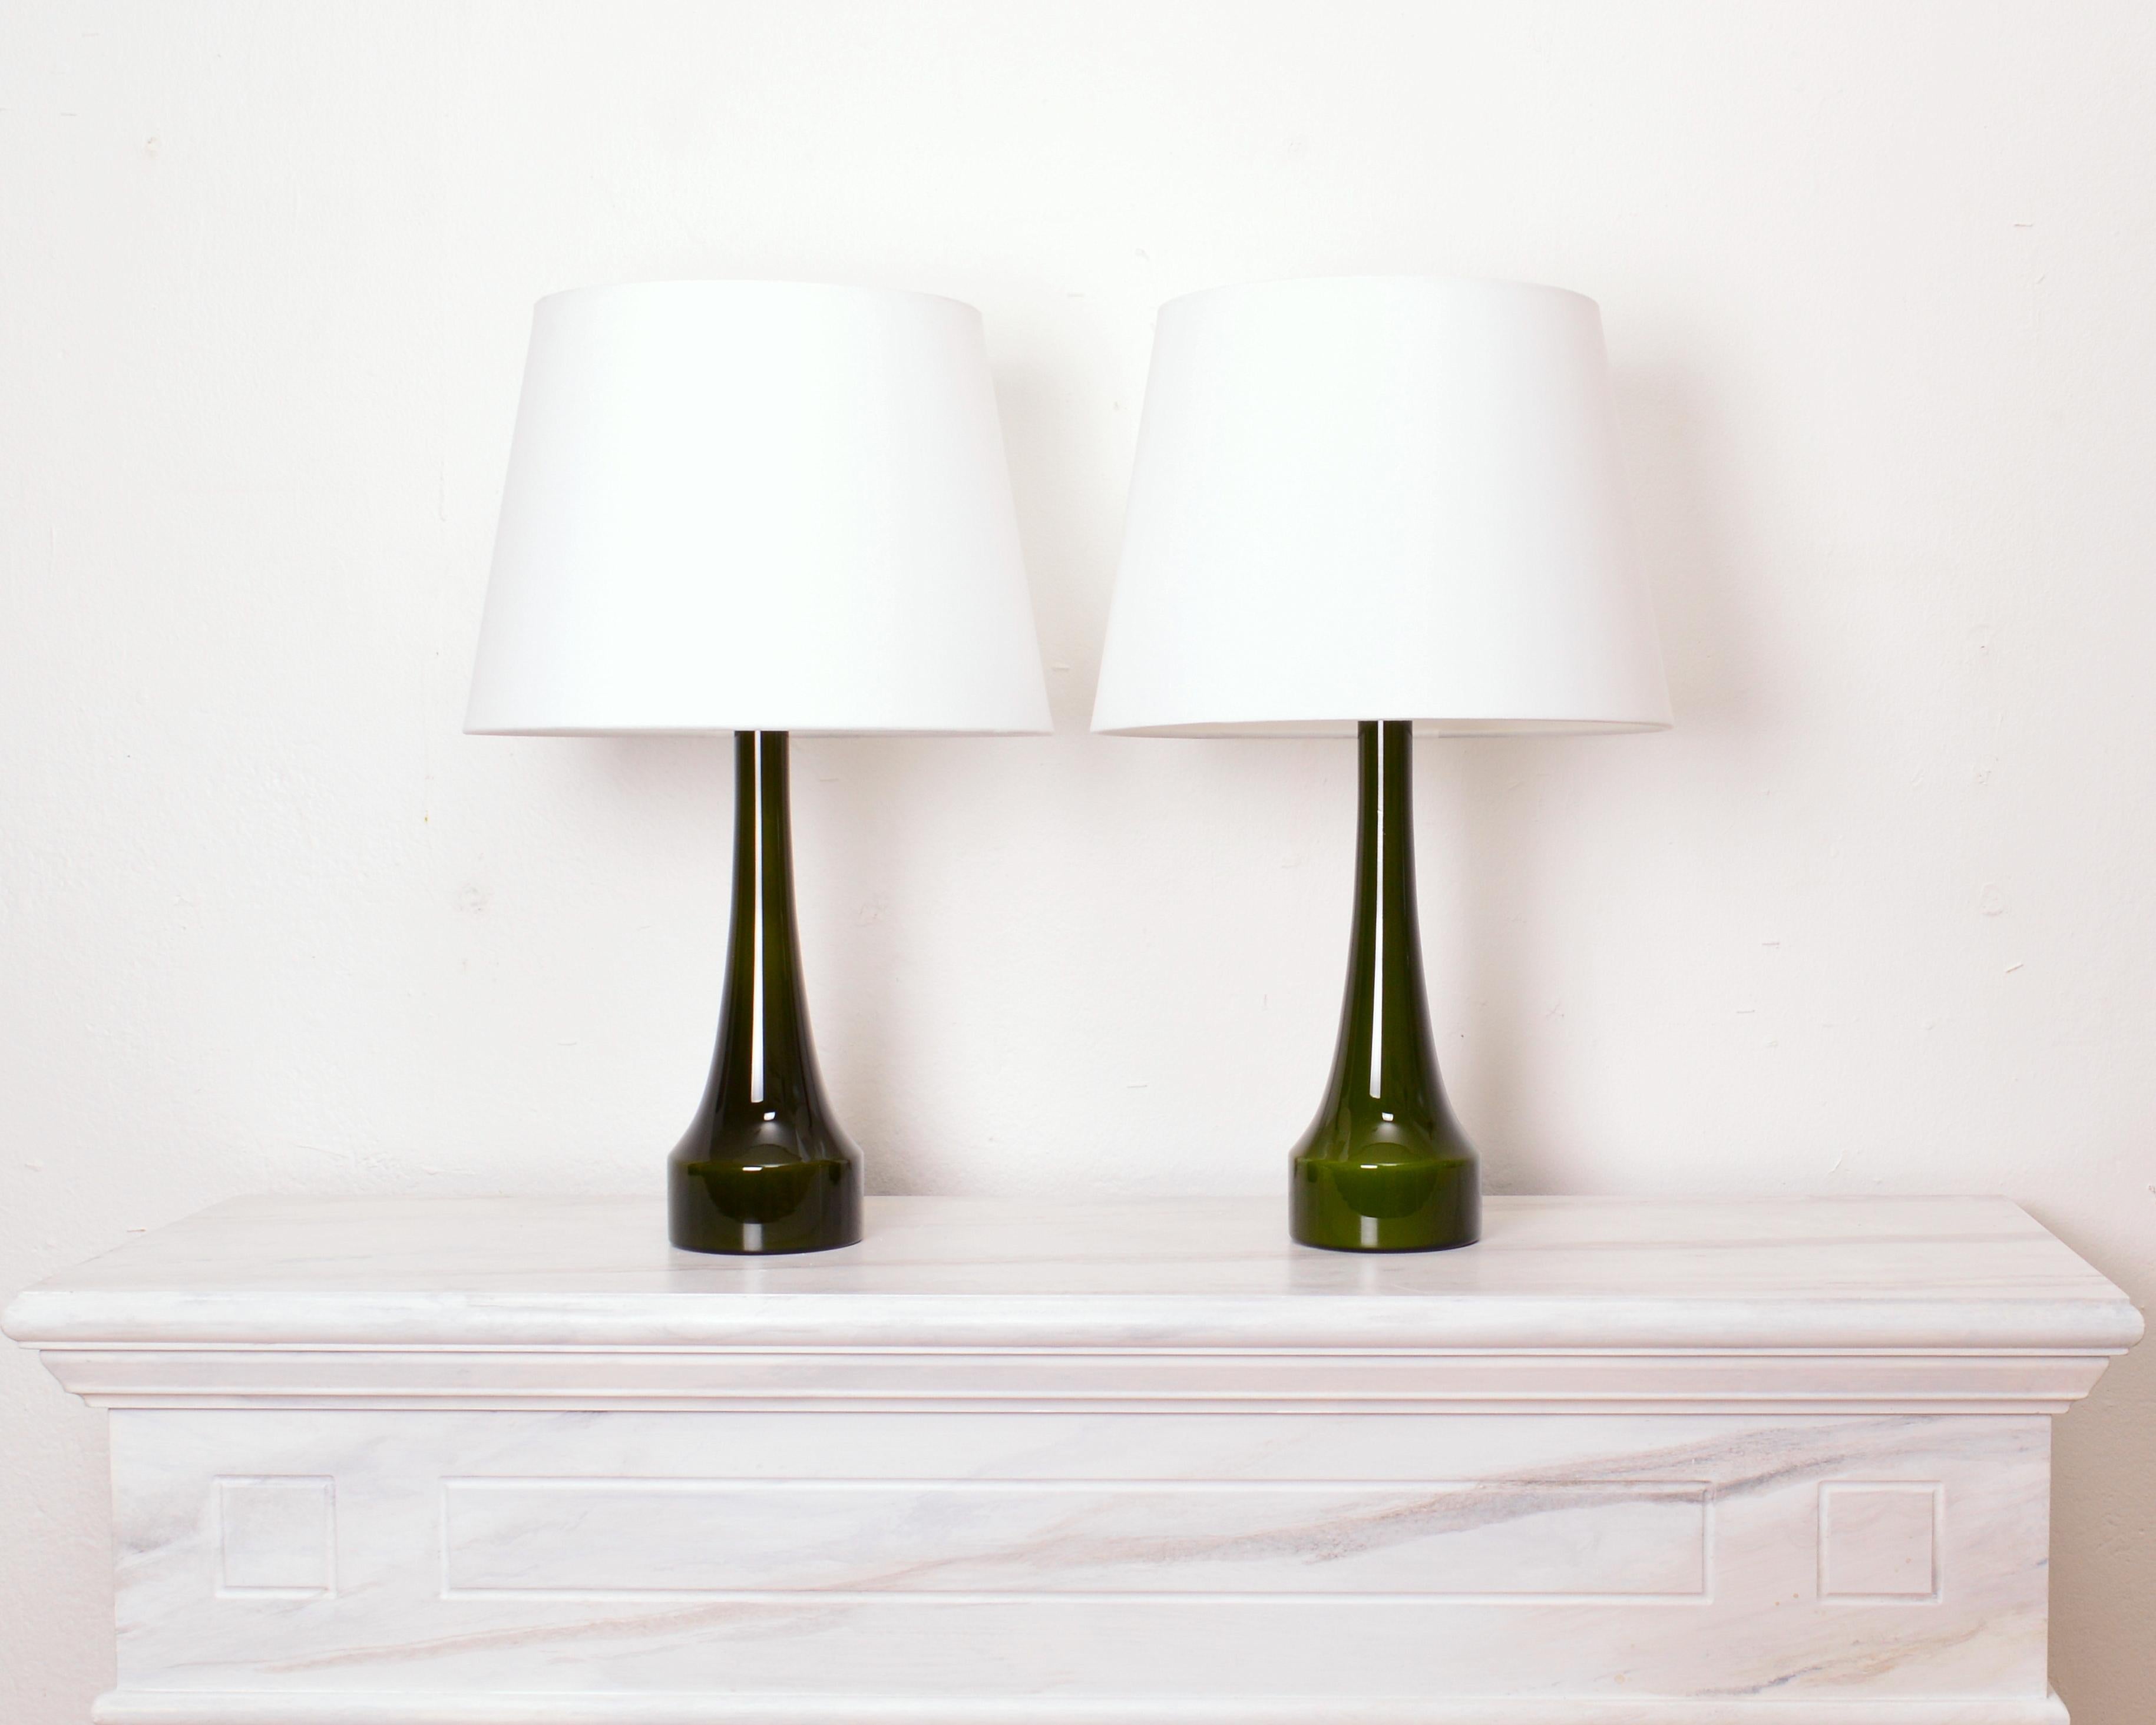 Set of two table lamps by Bergboms, Sweden 1960s. The lamps are made of glass and were manufactured by Holmegaard, Denmark. The design is simple and elegant with a slim waist and deep green color. Condition: Excellent vintage condition Measures: 36